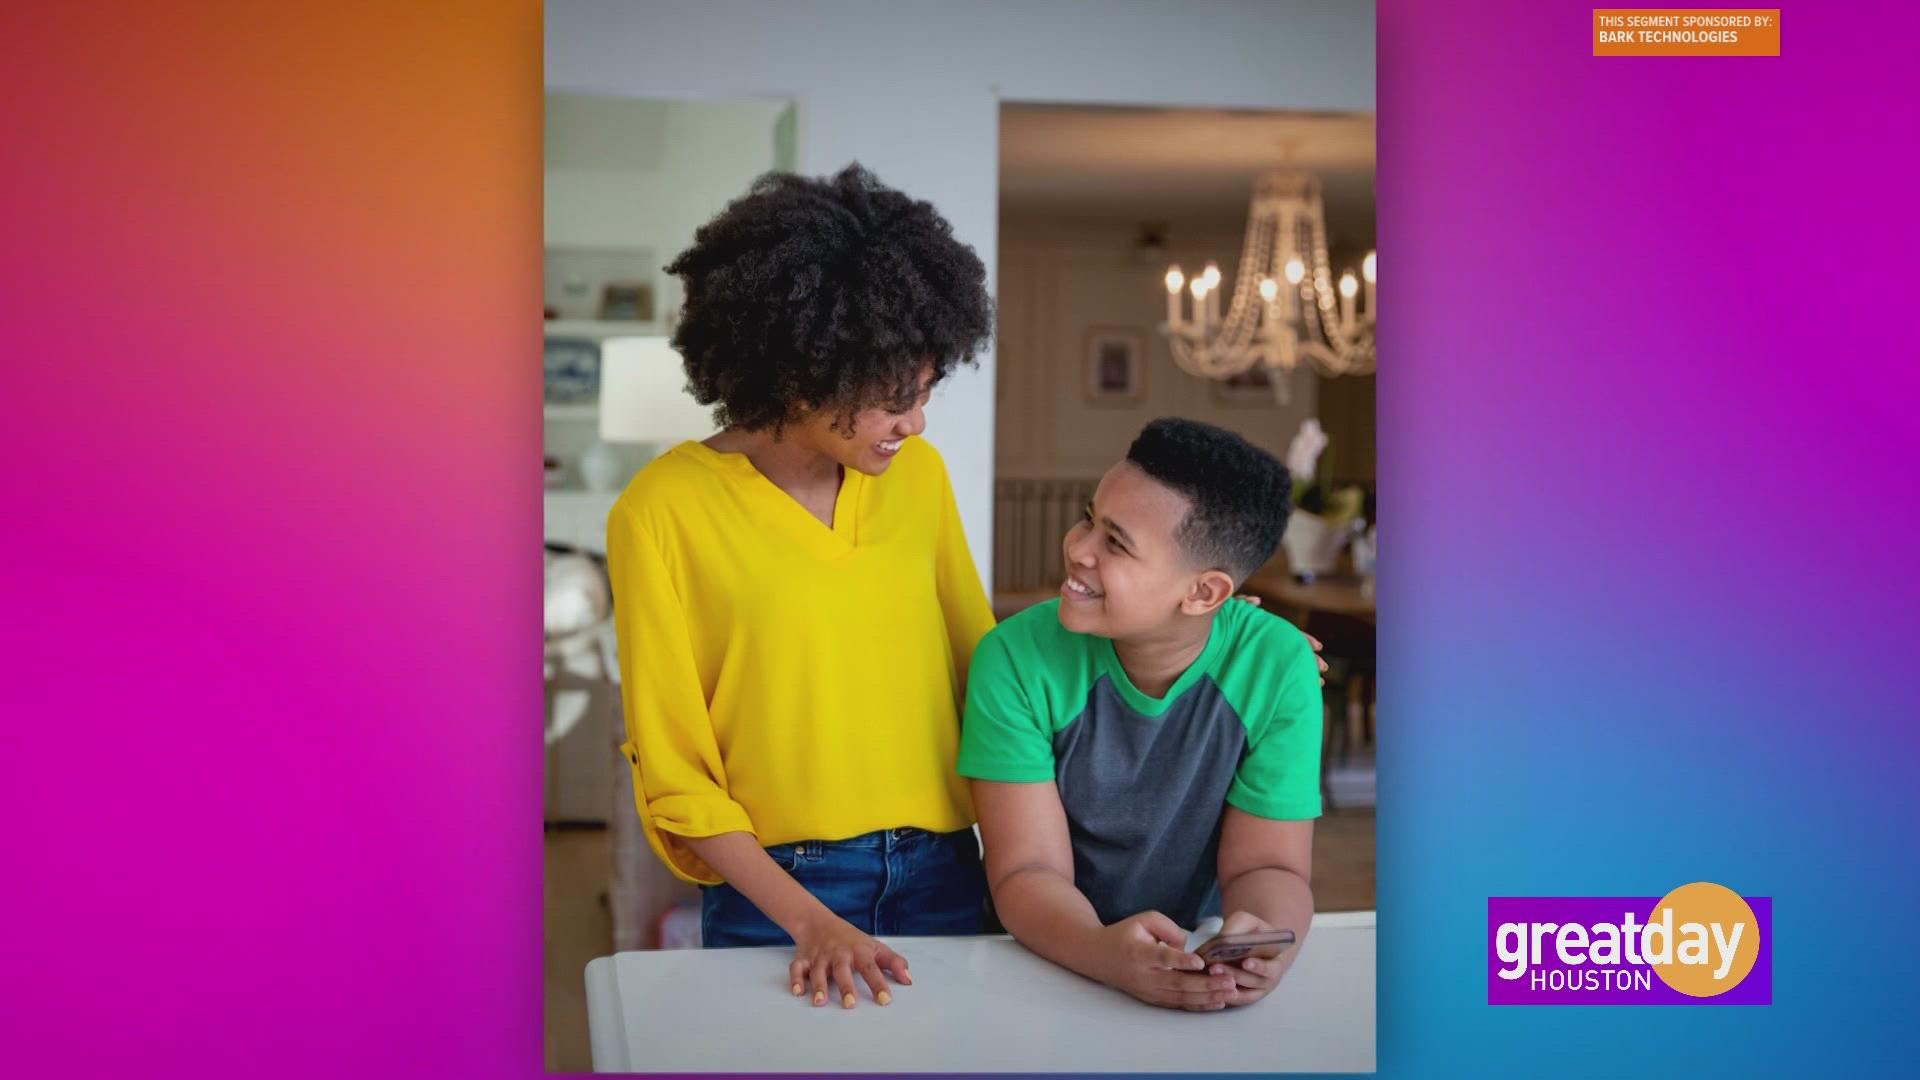 From parental controls, to monitoring your child's activity, the new Bark phone has it all! Titania Jordan, Chief Parenting Officer of Bark Technologies shares more.